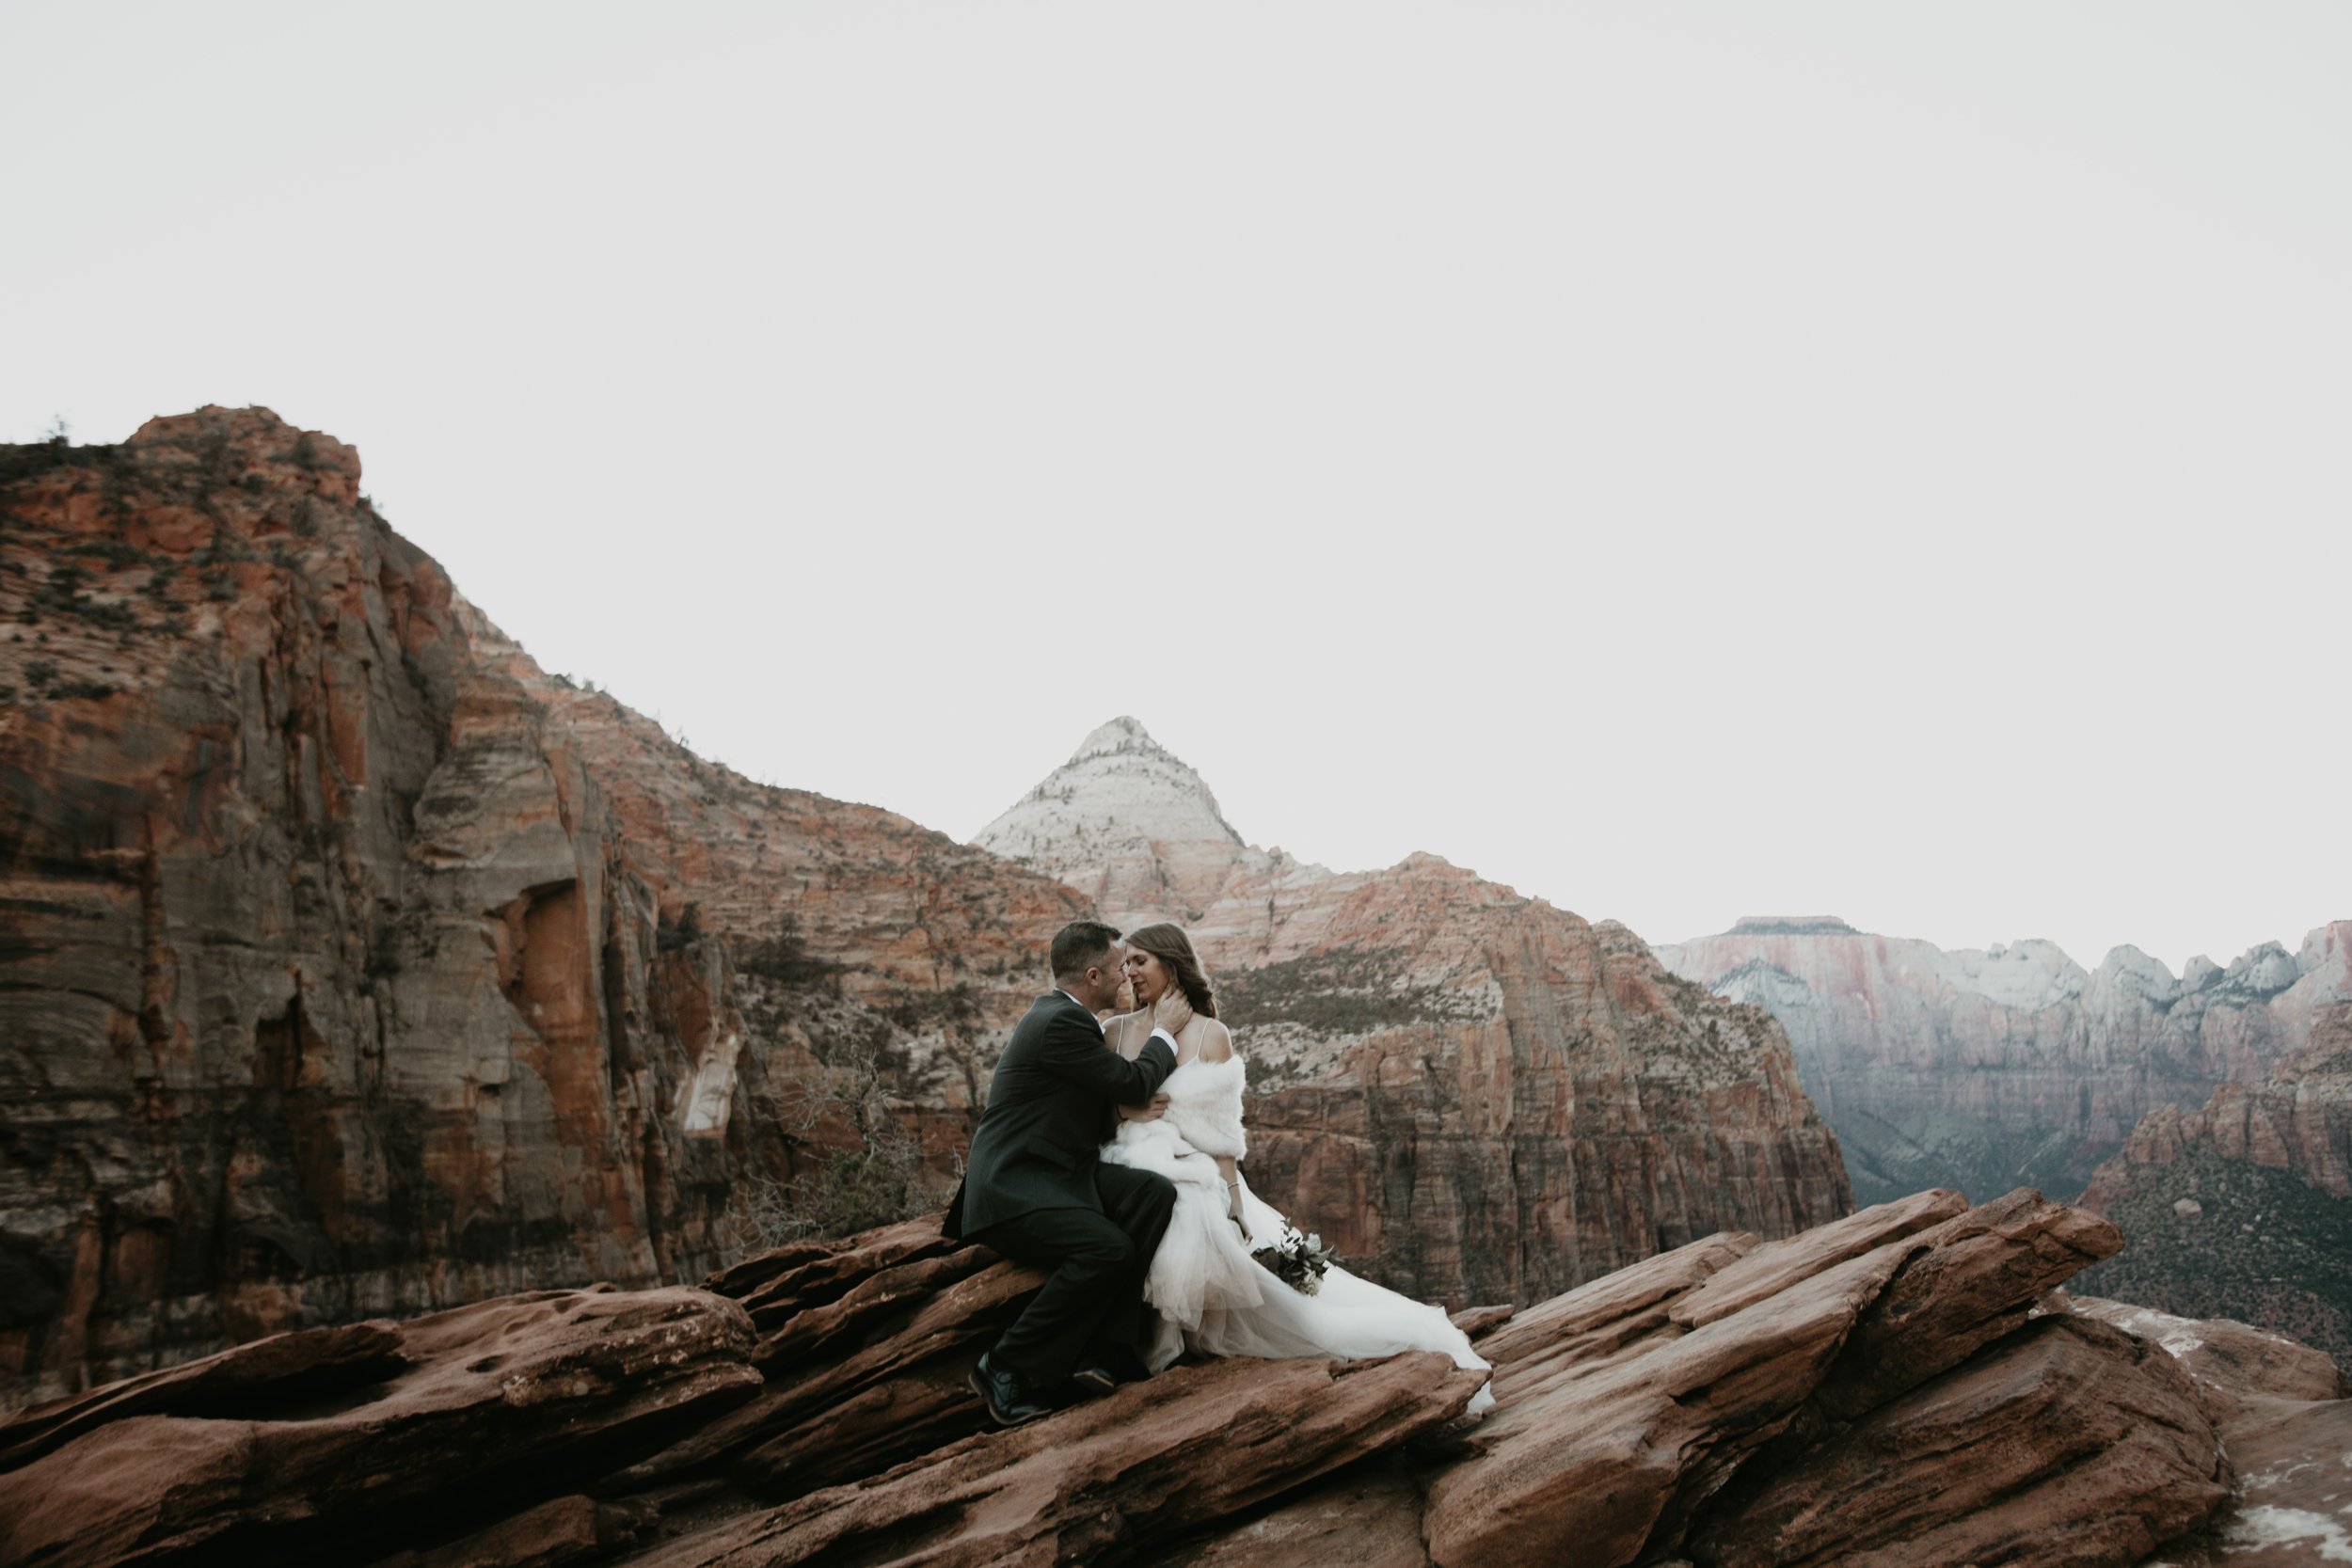 nicole-daacke-photography-zion-national-park-elopement-photographer-canyon-overlook-trail-elope-hiking-adventure-wedding-photos-fall-utah-red-rock-canyon-stgeorge-eloping-photographer-72.jpg